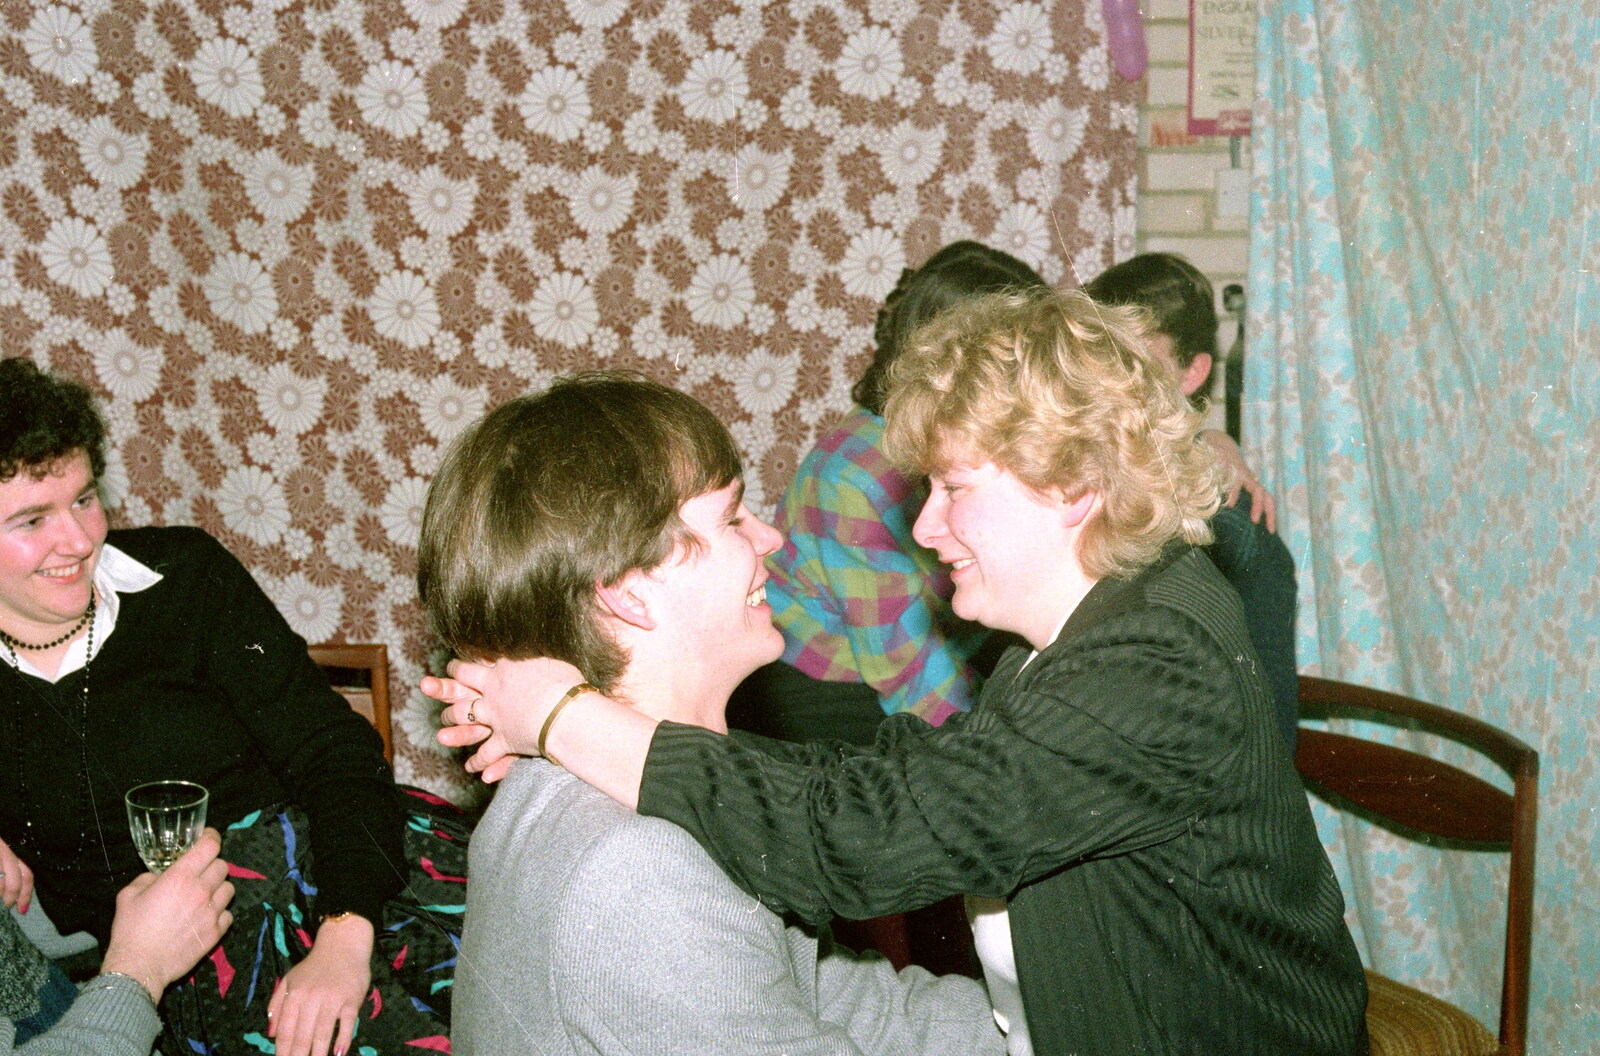 Phil and Anna from New Year's Eve at Anna's, Walkford, Dorset - 31st December 1985